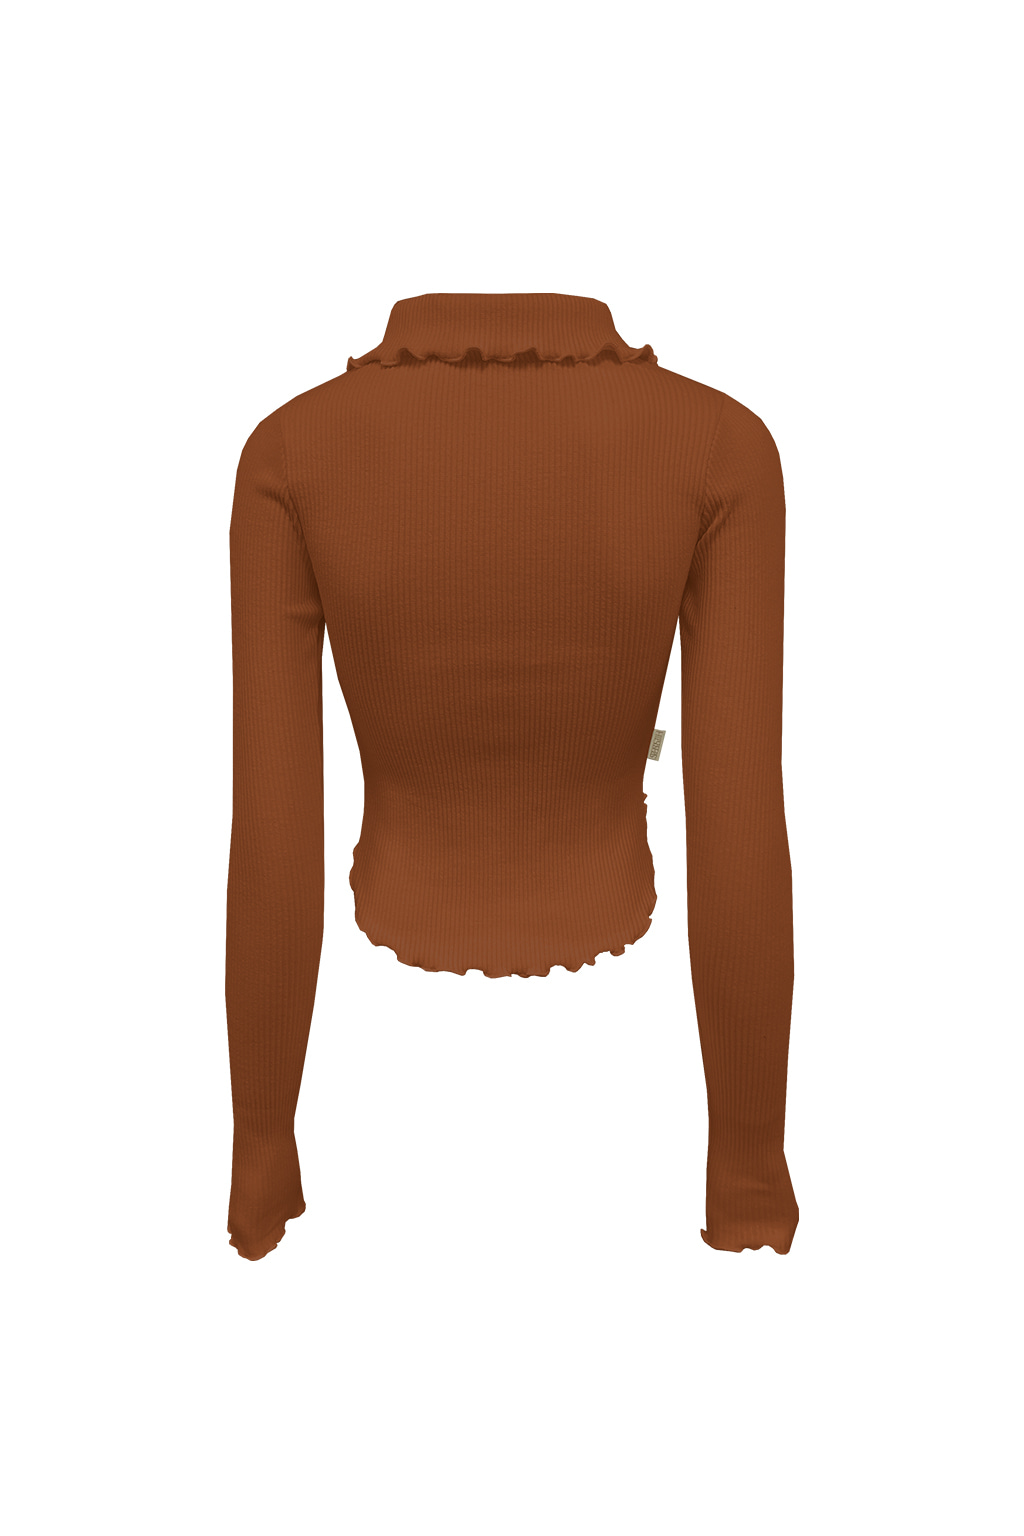 V-neck Tension Two-Way Glamour Zip-Up Rust Brown